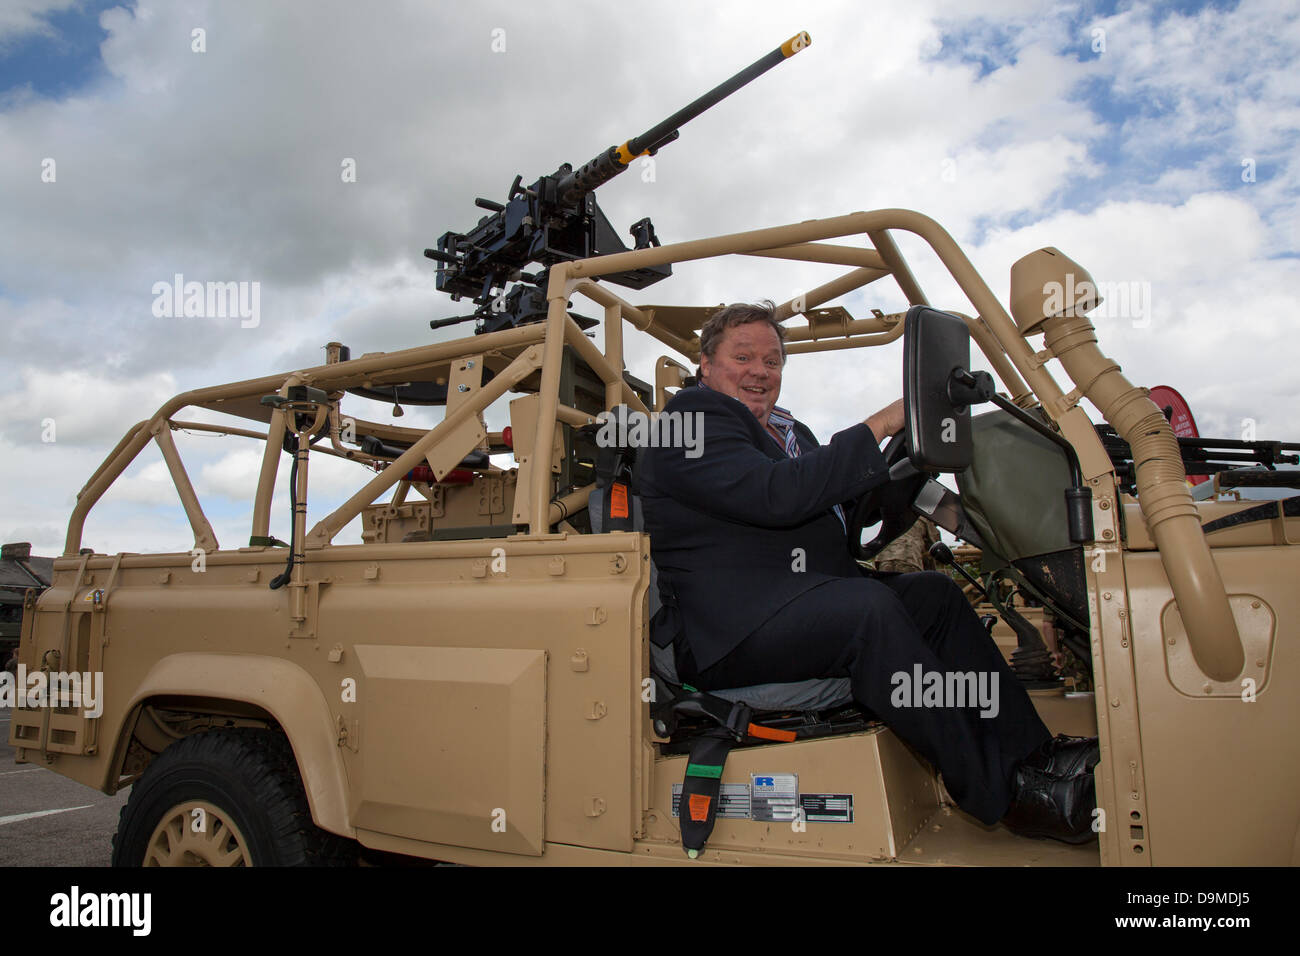 Army Land Rover with snorkel exhaust, at Preston UK, 22 June 2013. Ted Robbins actor, television presenter and radio broadcaster at the Preston Military Show at Fulwood Barracks, Preston, Lancashire .   Servicemen and women, cadets and veterans represent the Royal Navy, the Army and the Royal Air Force from all over the North West: Cheshire, Cumbria, Lancashire, Merseyside and Greater Manchester.  The Preston Military Show is the largest display by the armed forces in the North West of England. Stock Photo